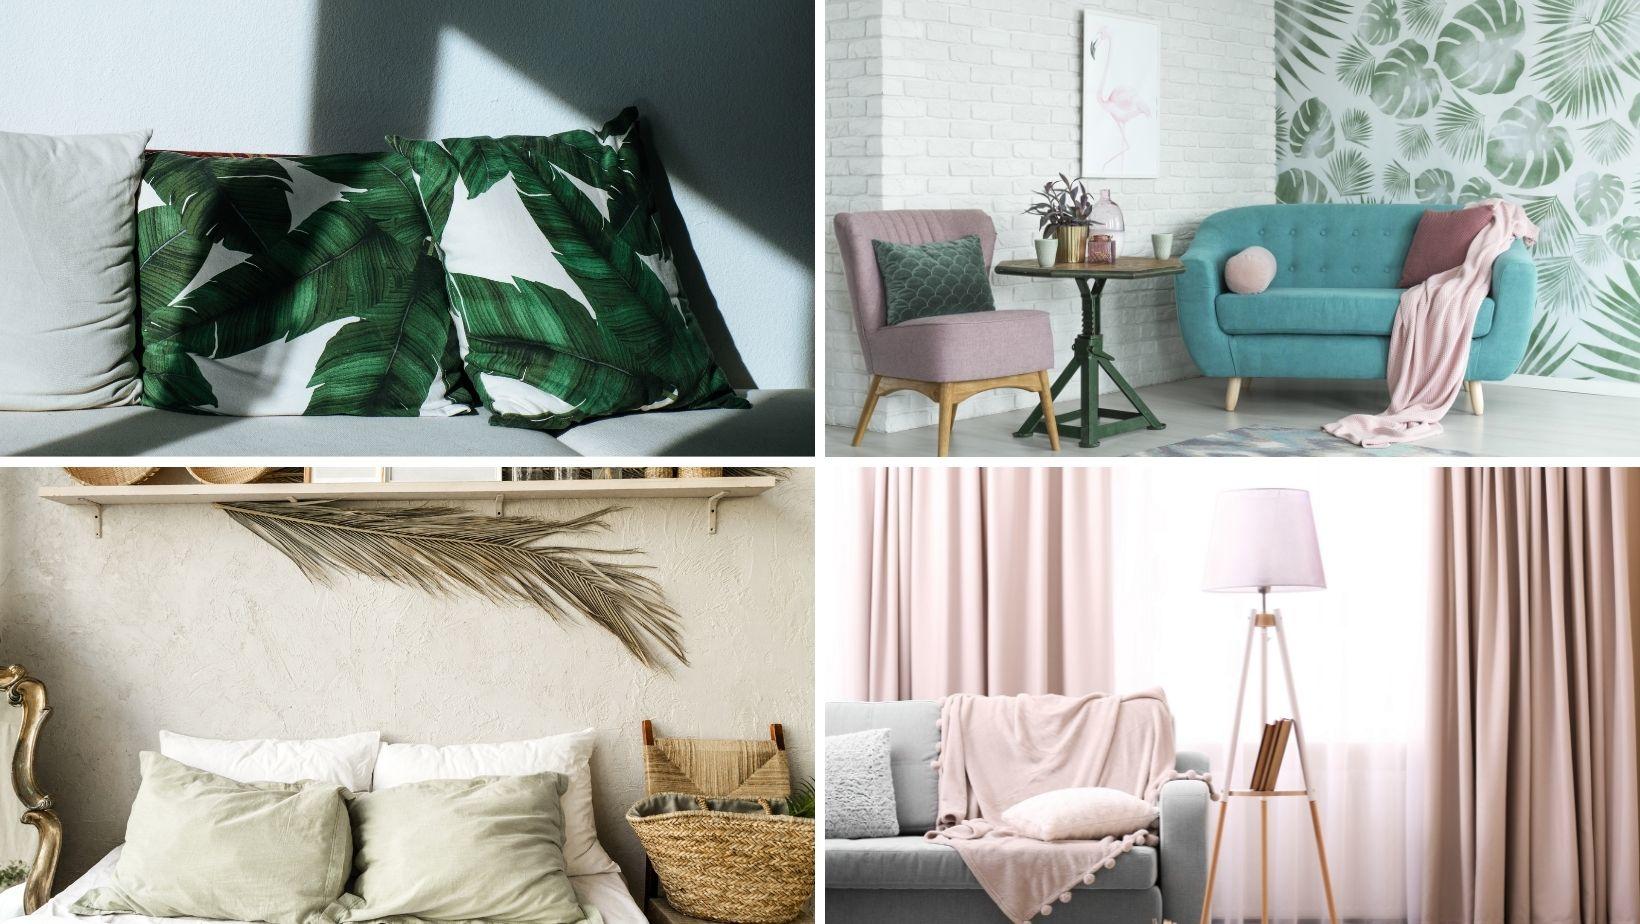 Collage of home decor pieces in colors of the year for 2021: pastels, compiled by PH Design, home builders specializing in custom home design and construction in Canton, Ohio